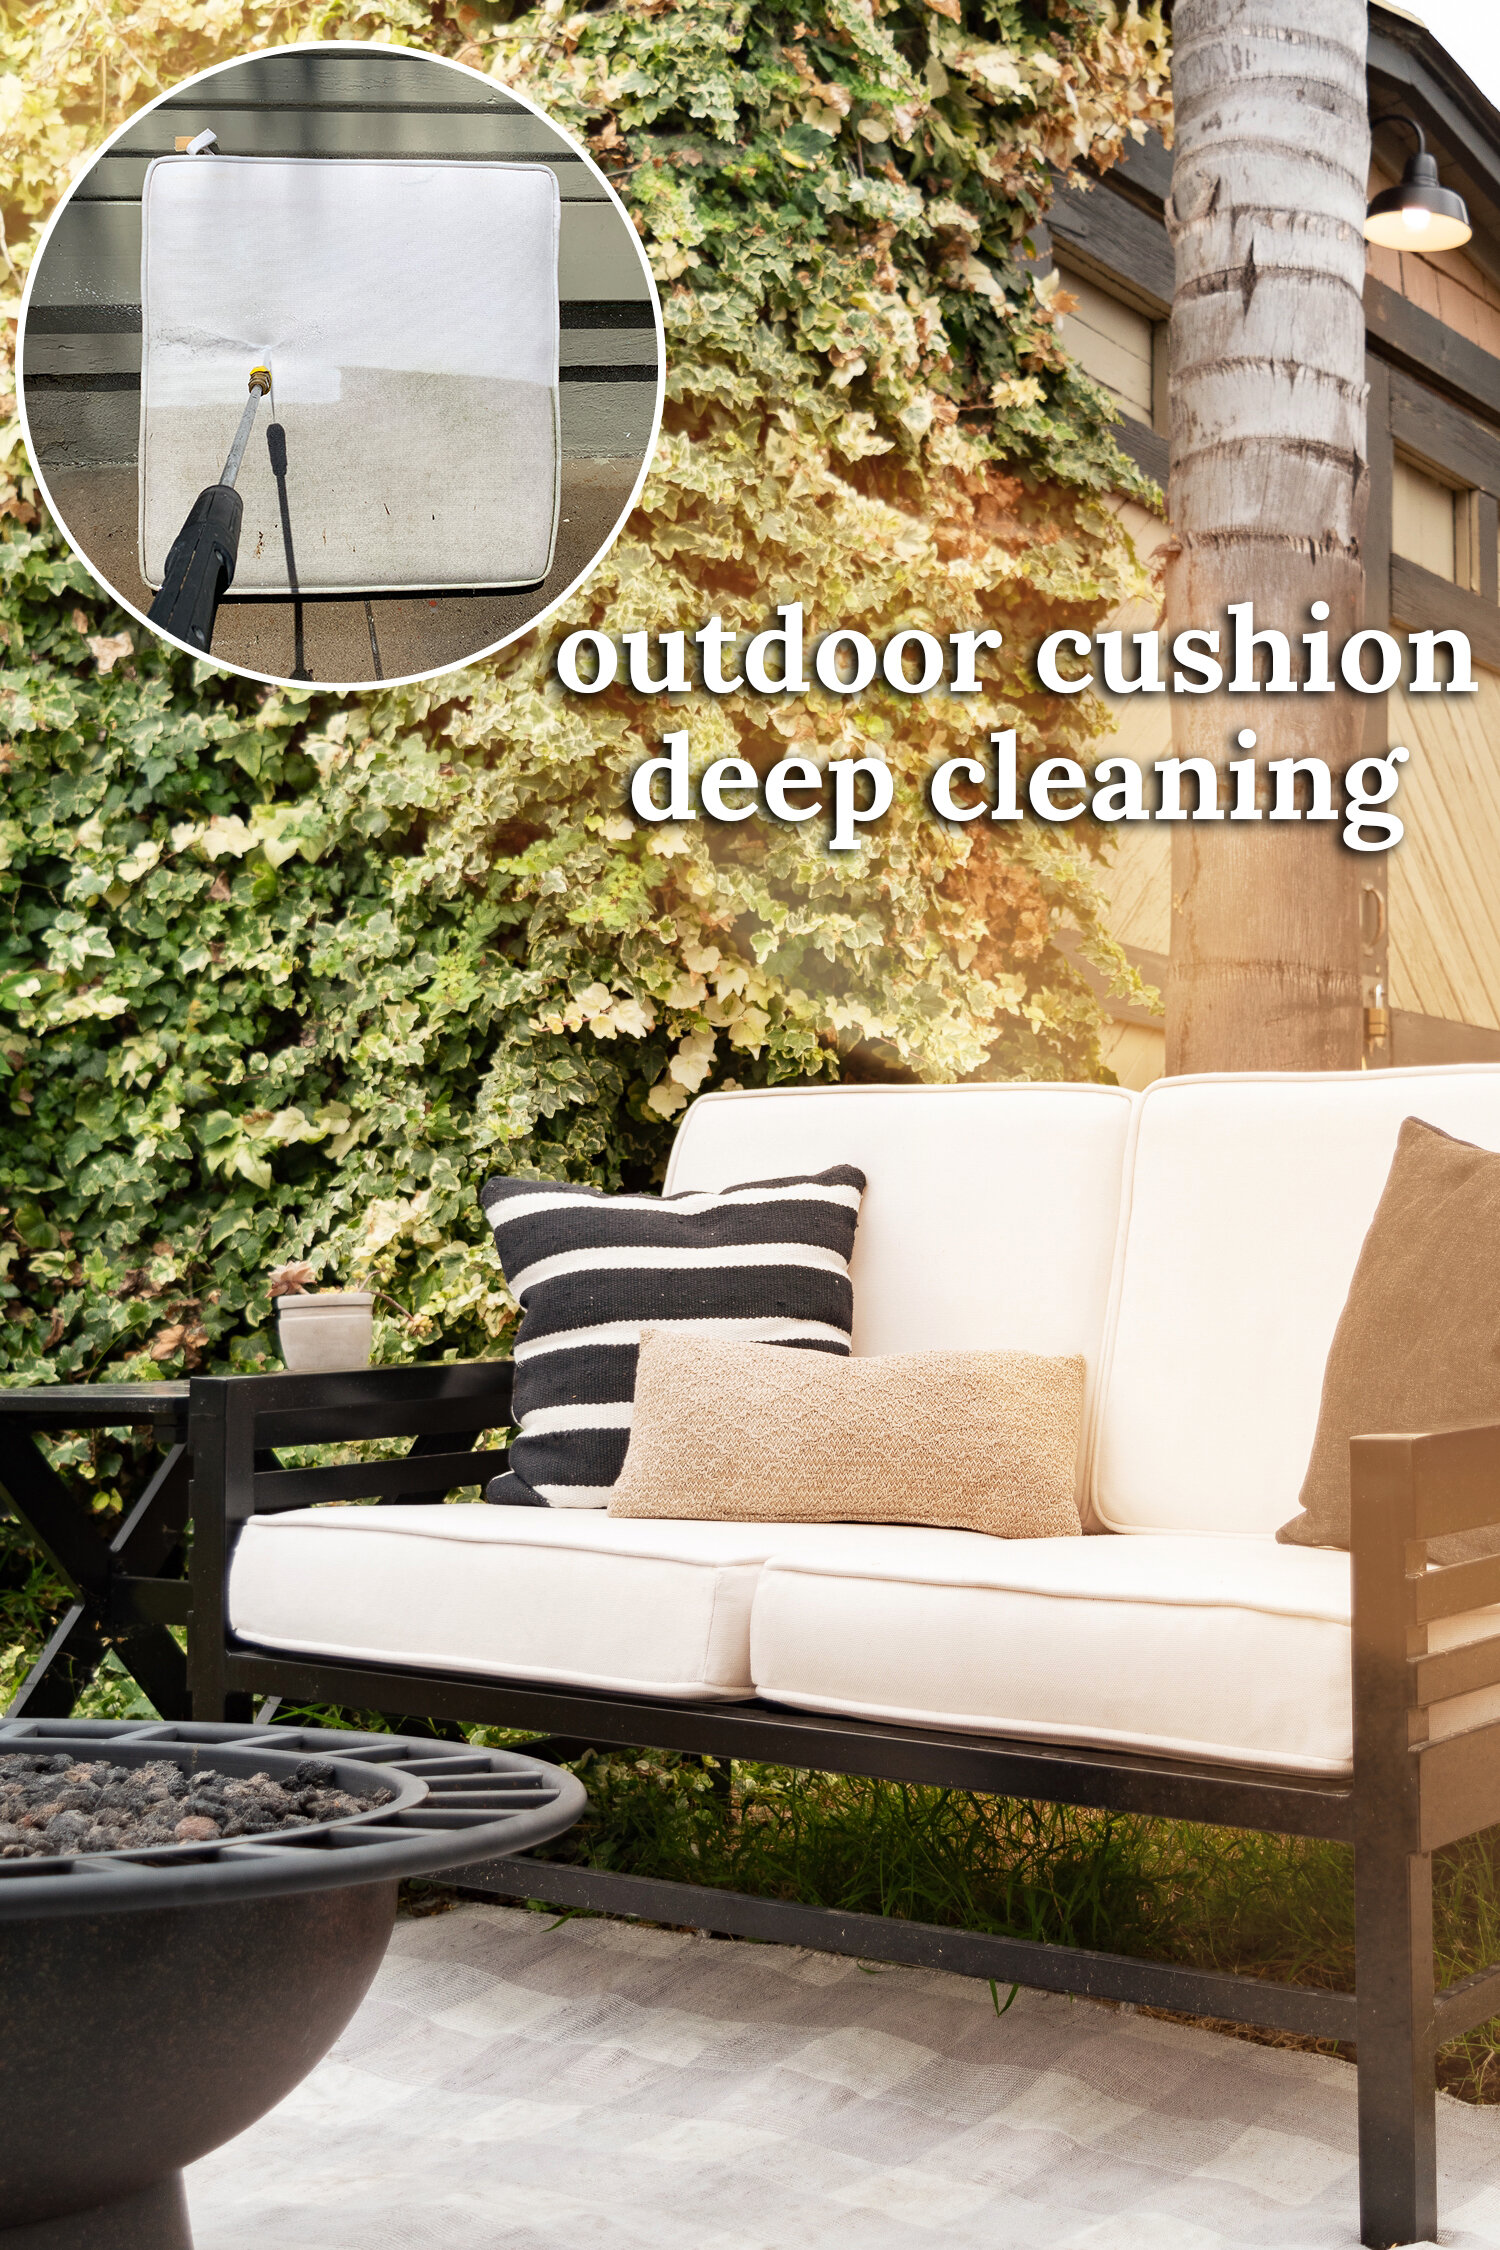 Pressure Washing My Outdoor Cushions, What S The Best Way To Clean Outdoor Furniture Cushions